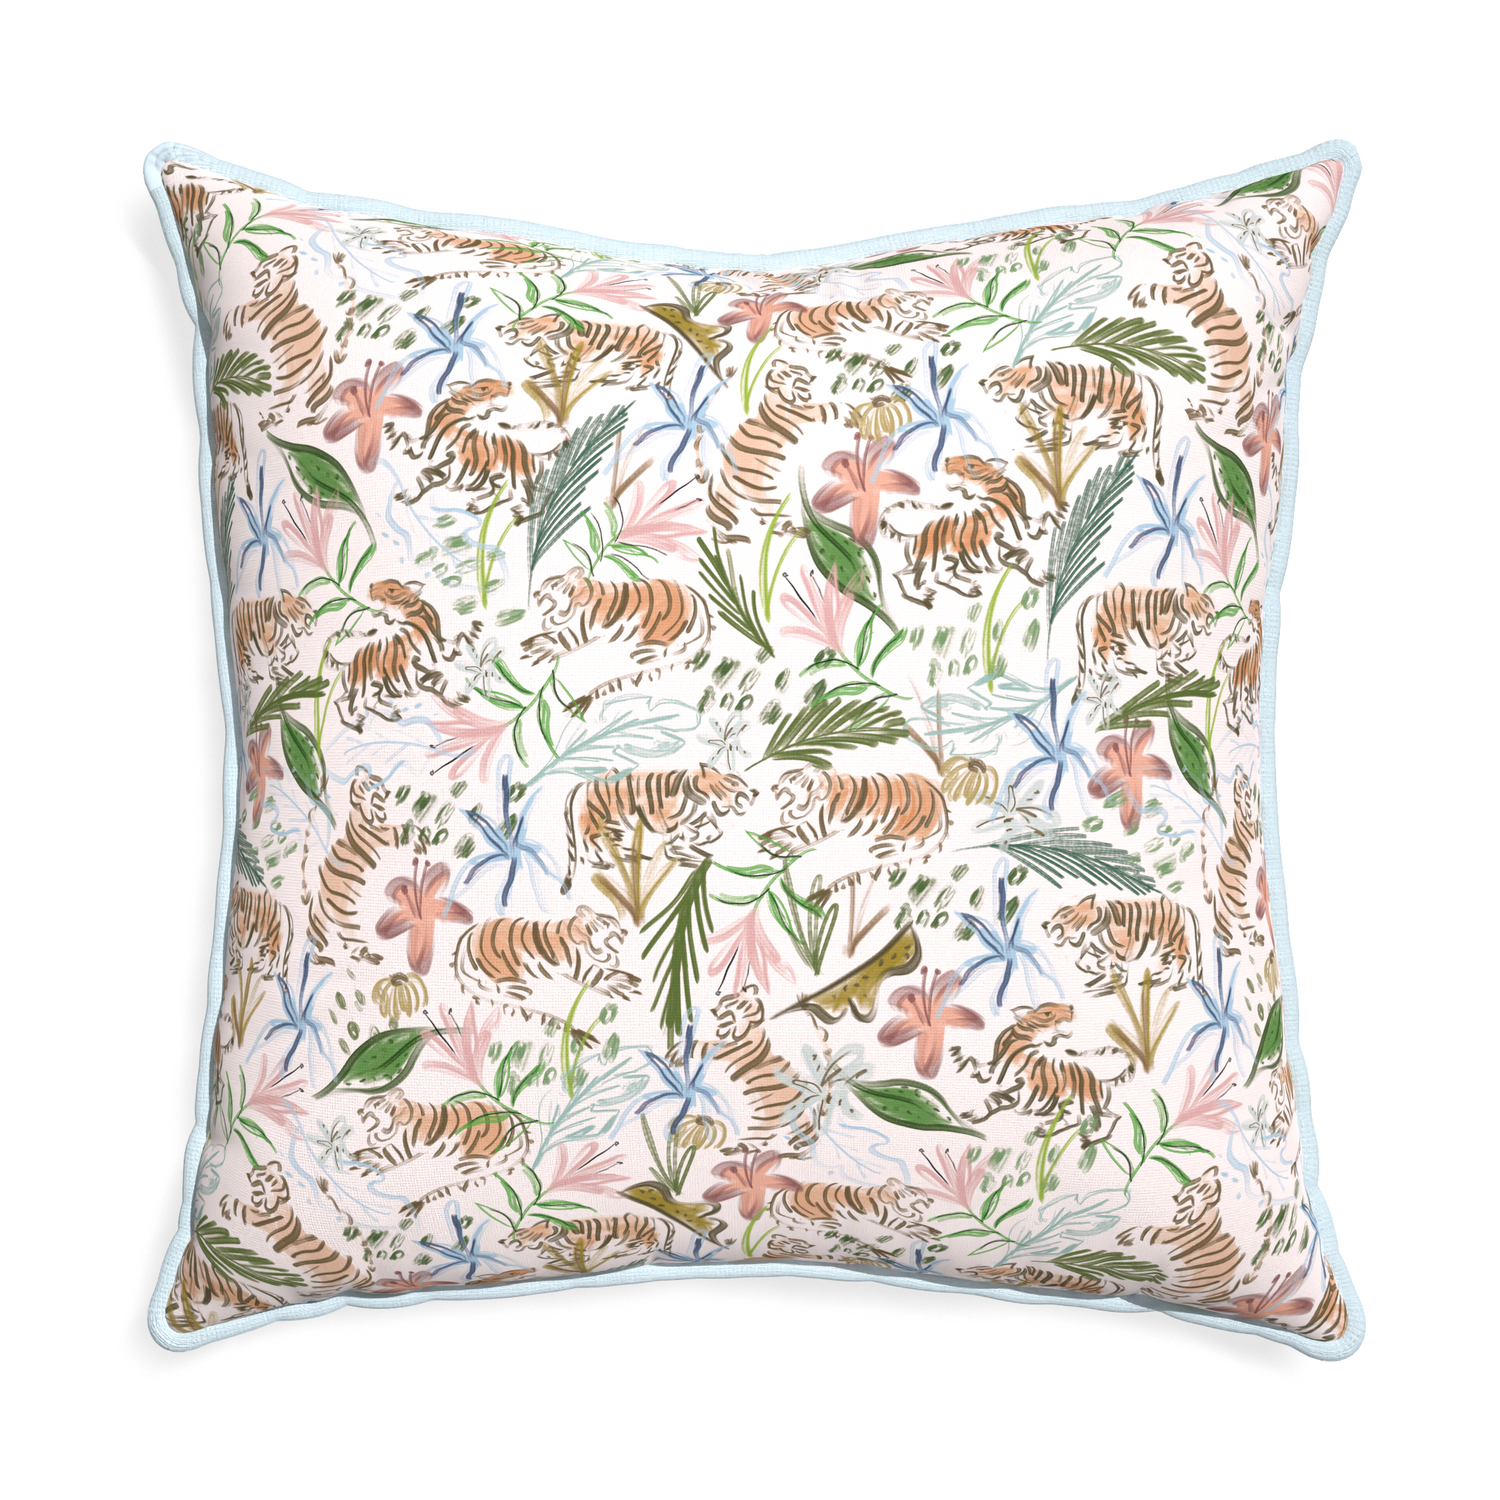 Euro-sham frida pink custom pink chinoiserie tigerpillow with powder piping on white background